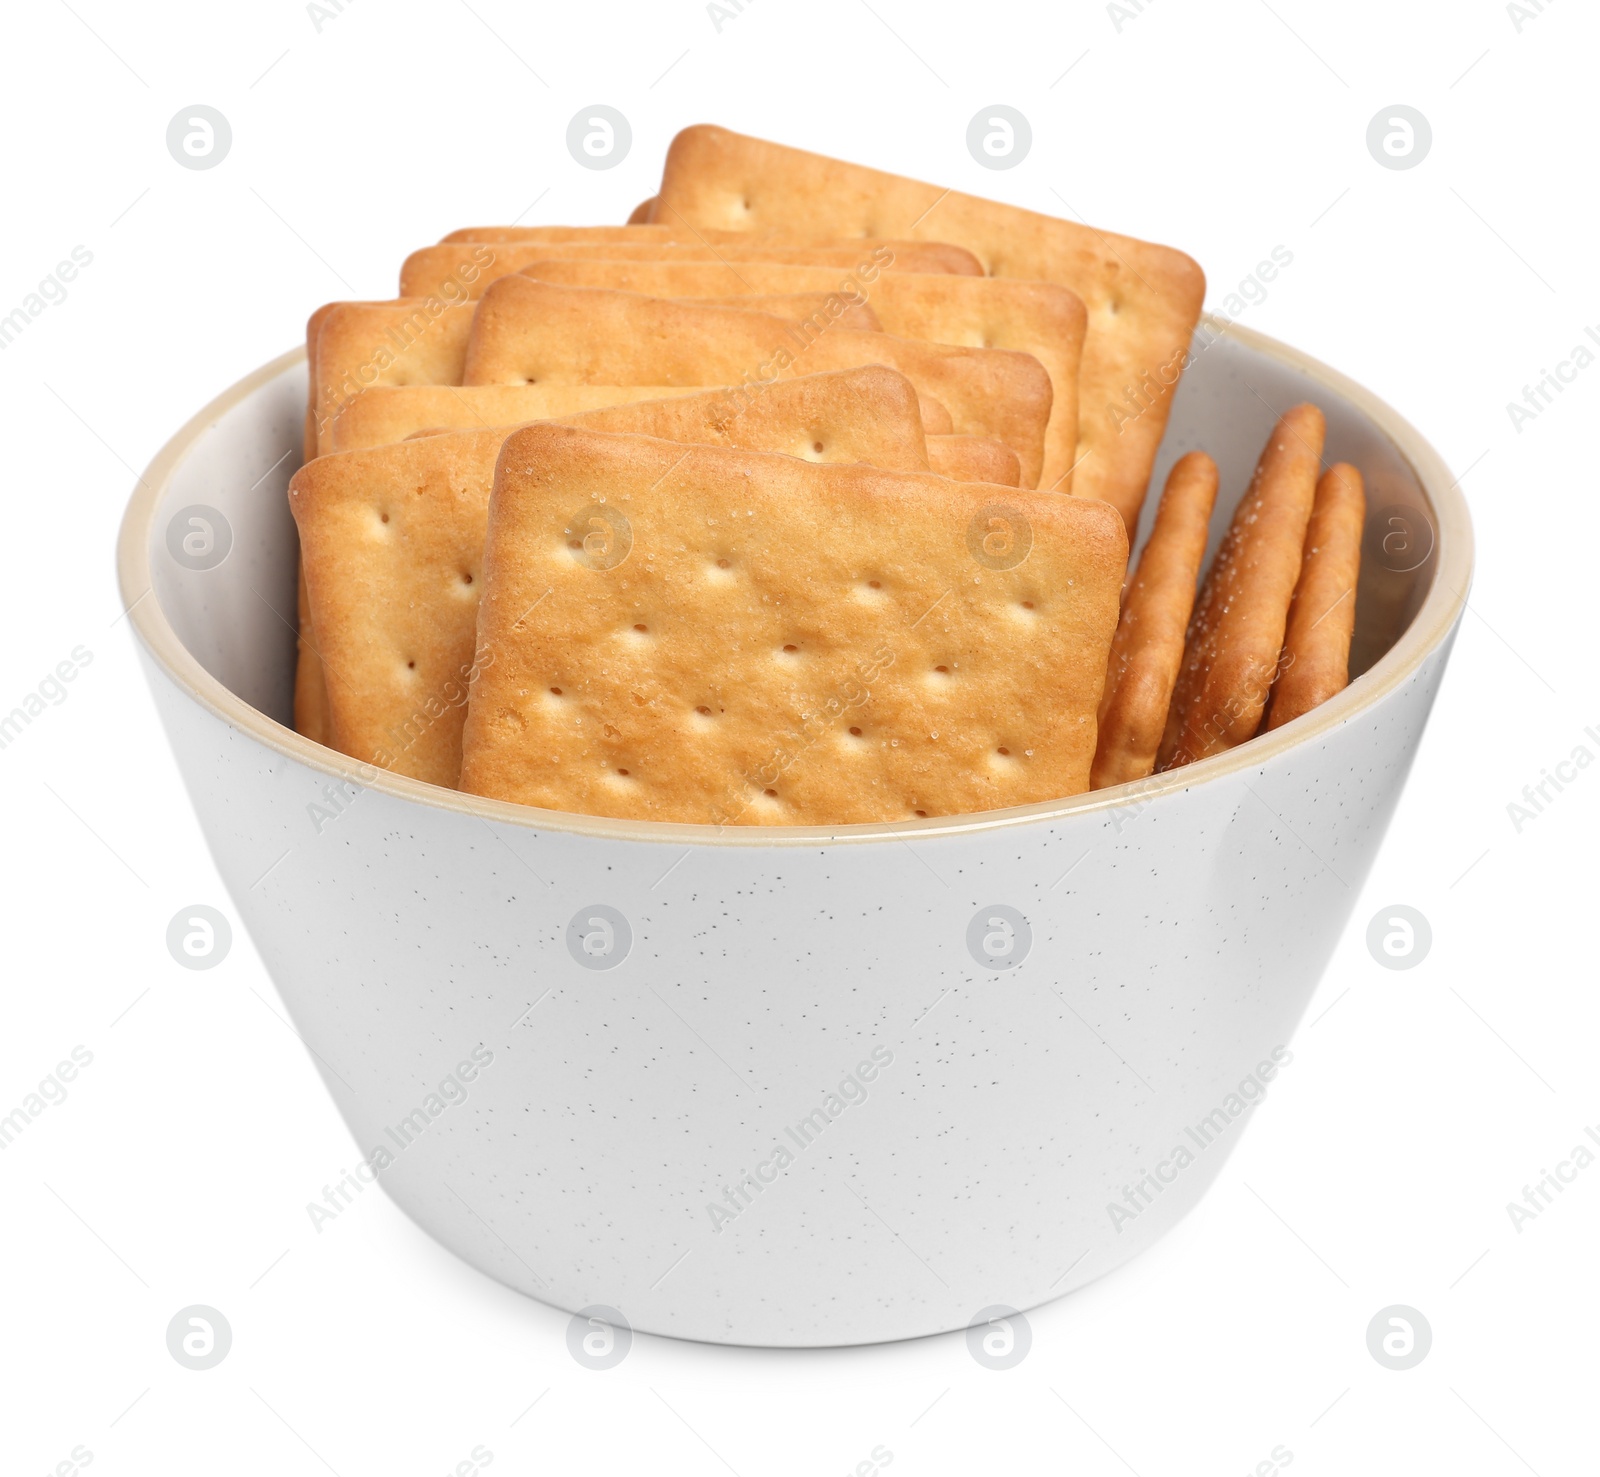 Photo of Tasty crackers in bowl isolated on white